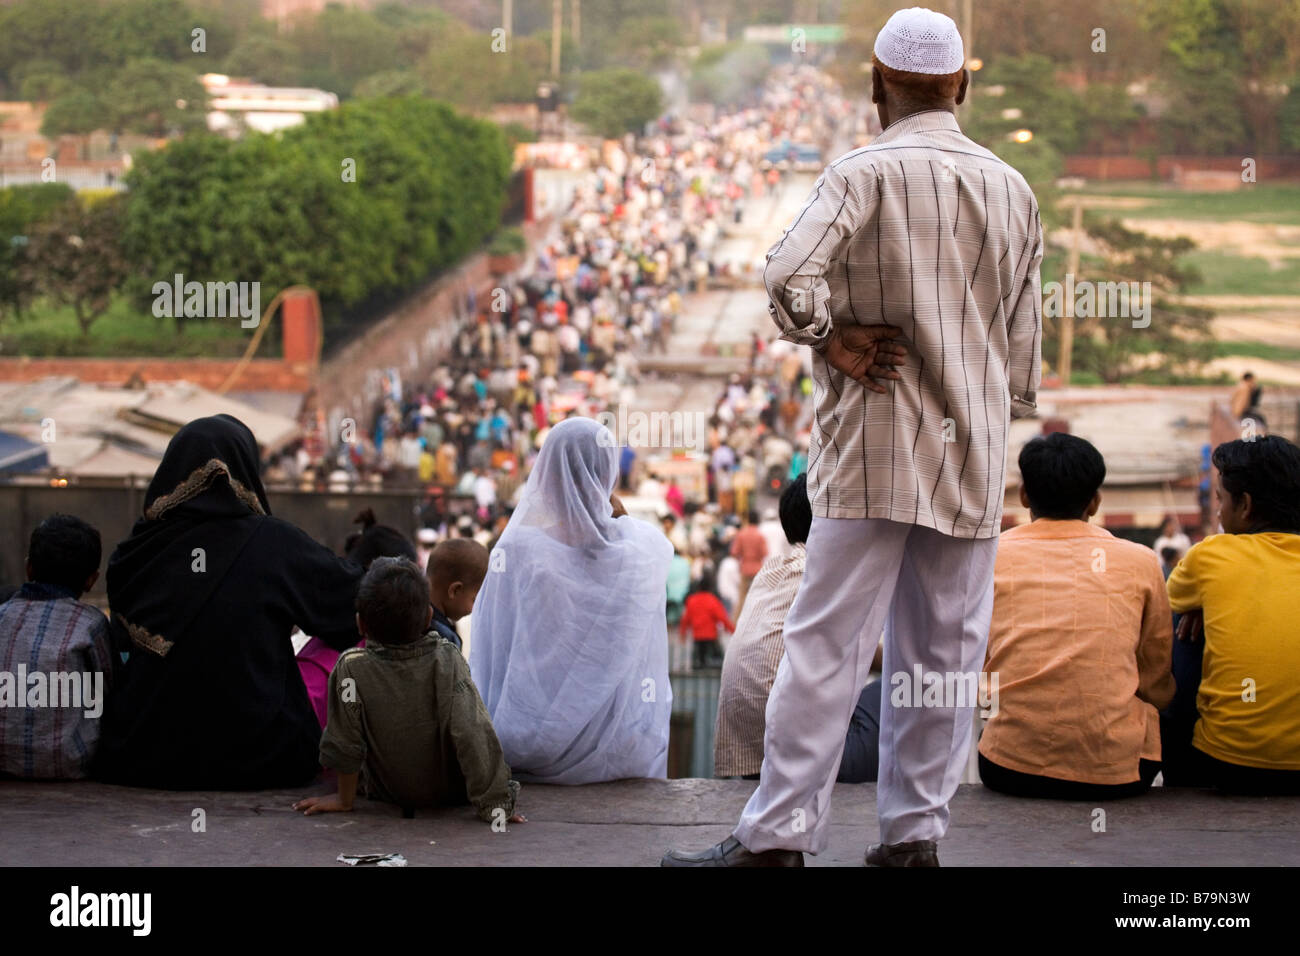 A muslim family together on the steps of the Jama Masjid in Delhi, India. Stock Photo